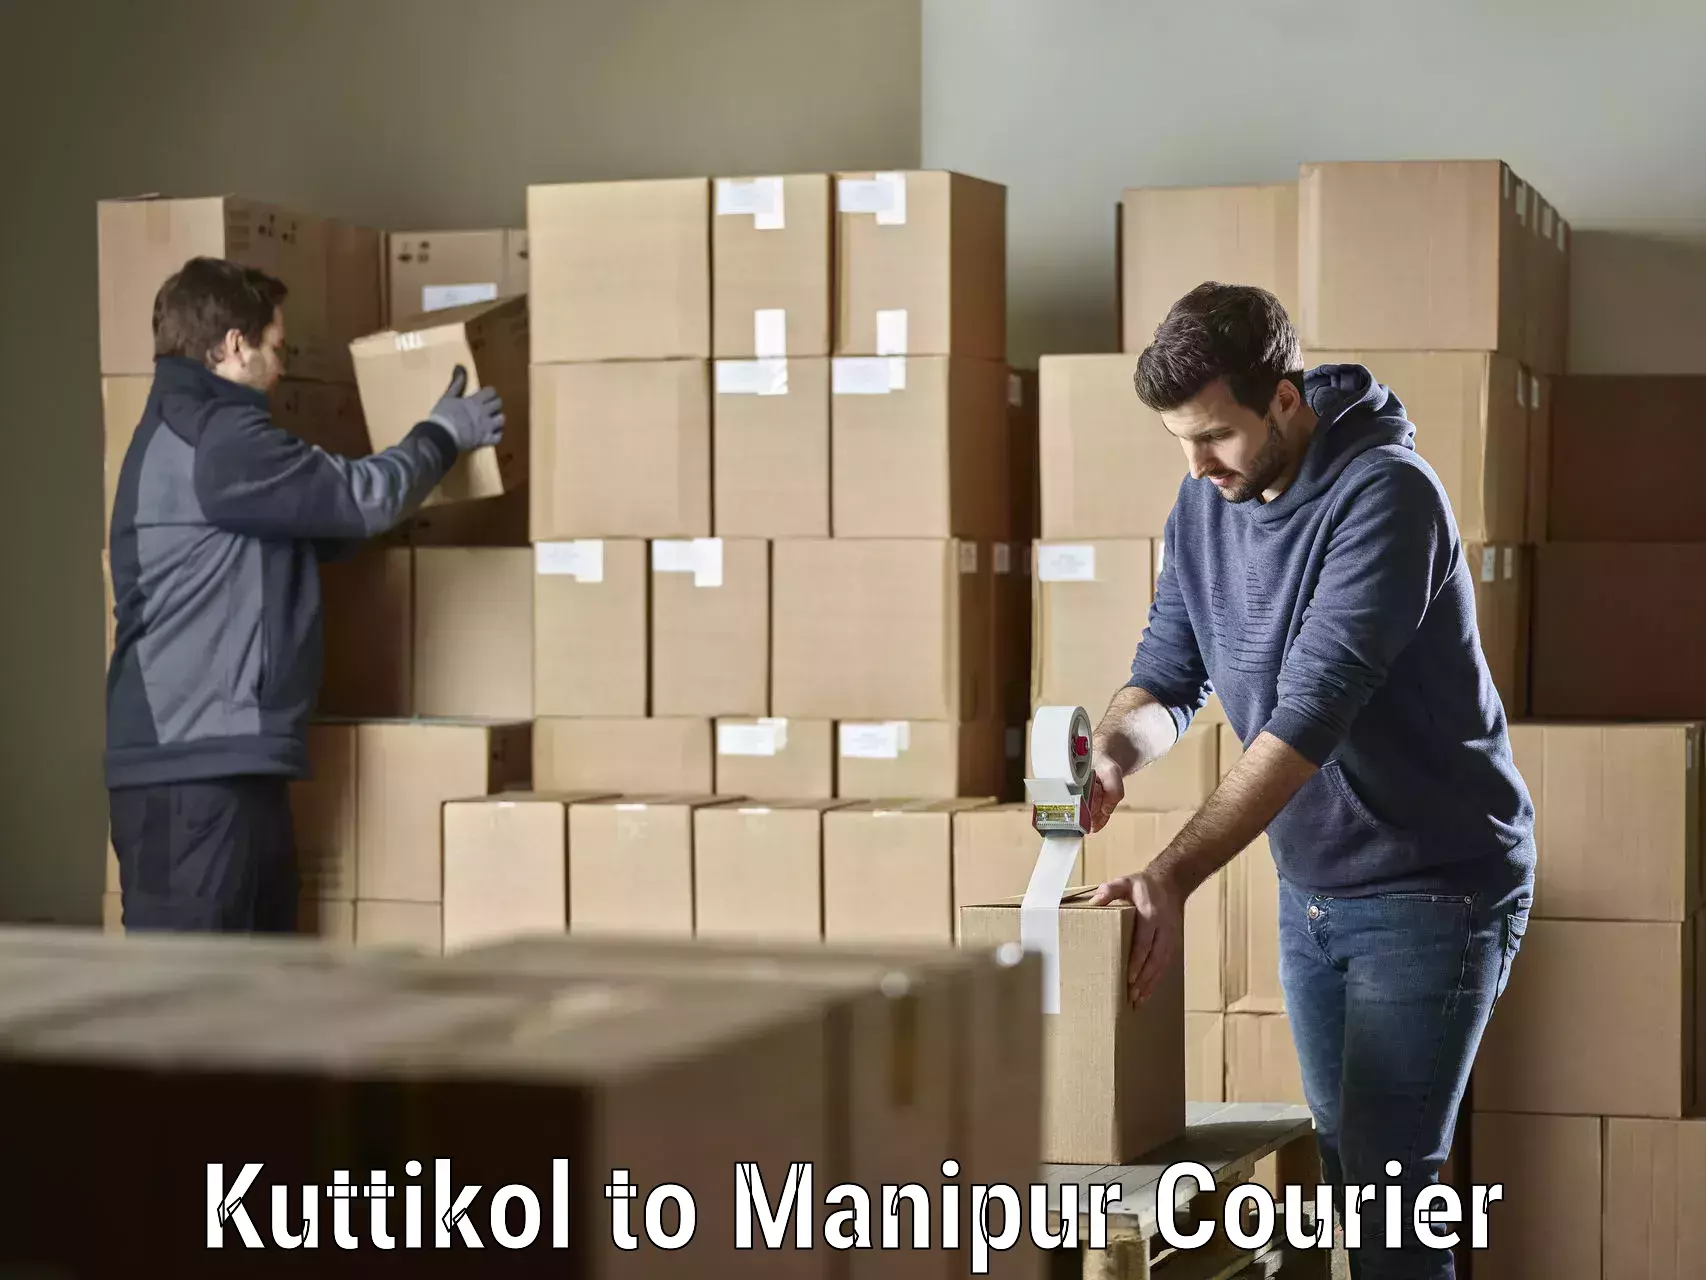 State-of-the-art courier technology Kuttikol to Imphal